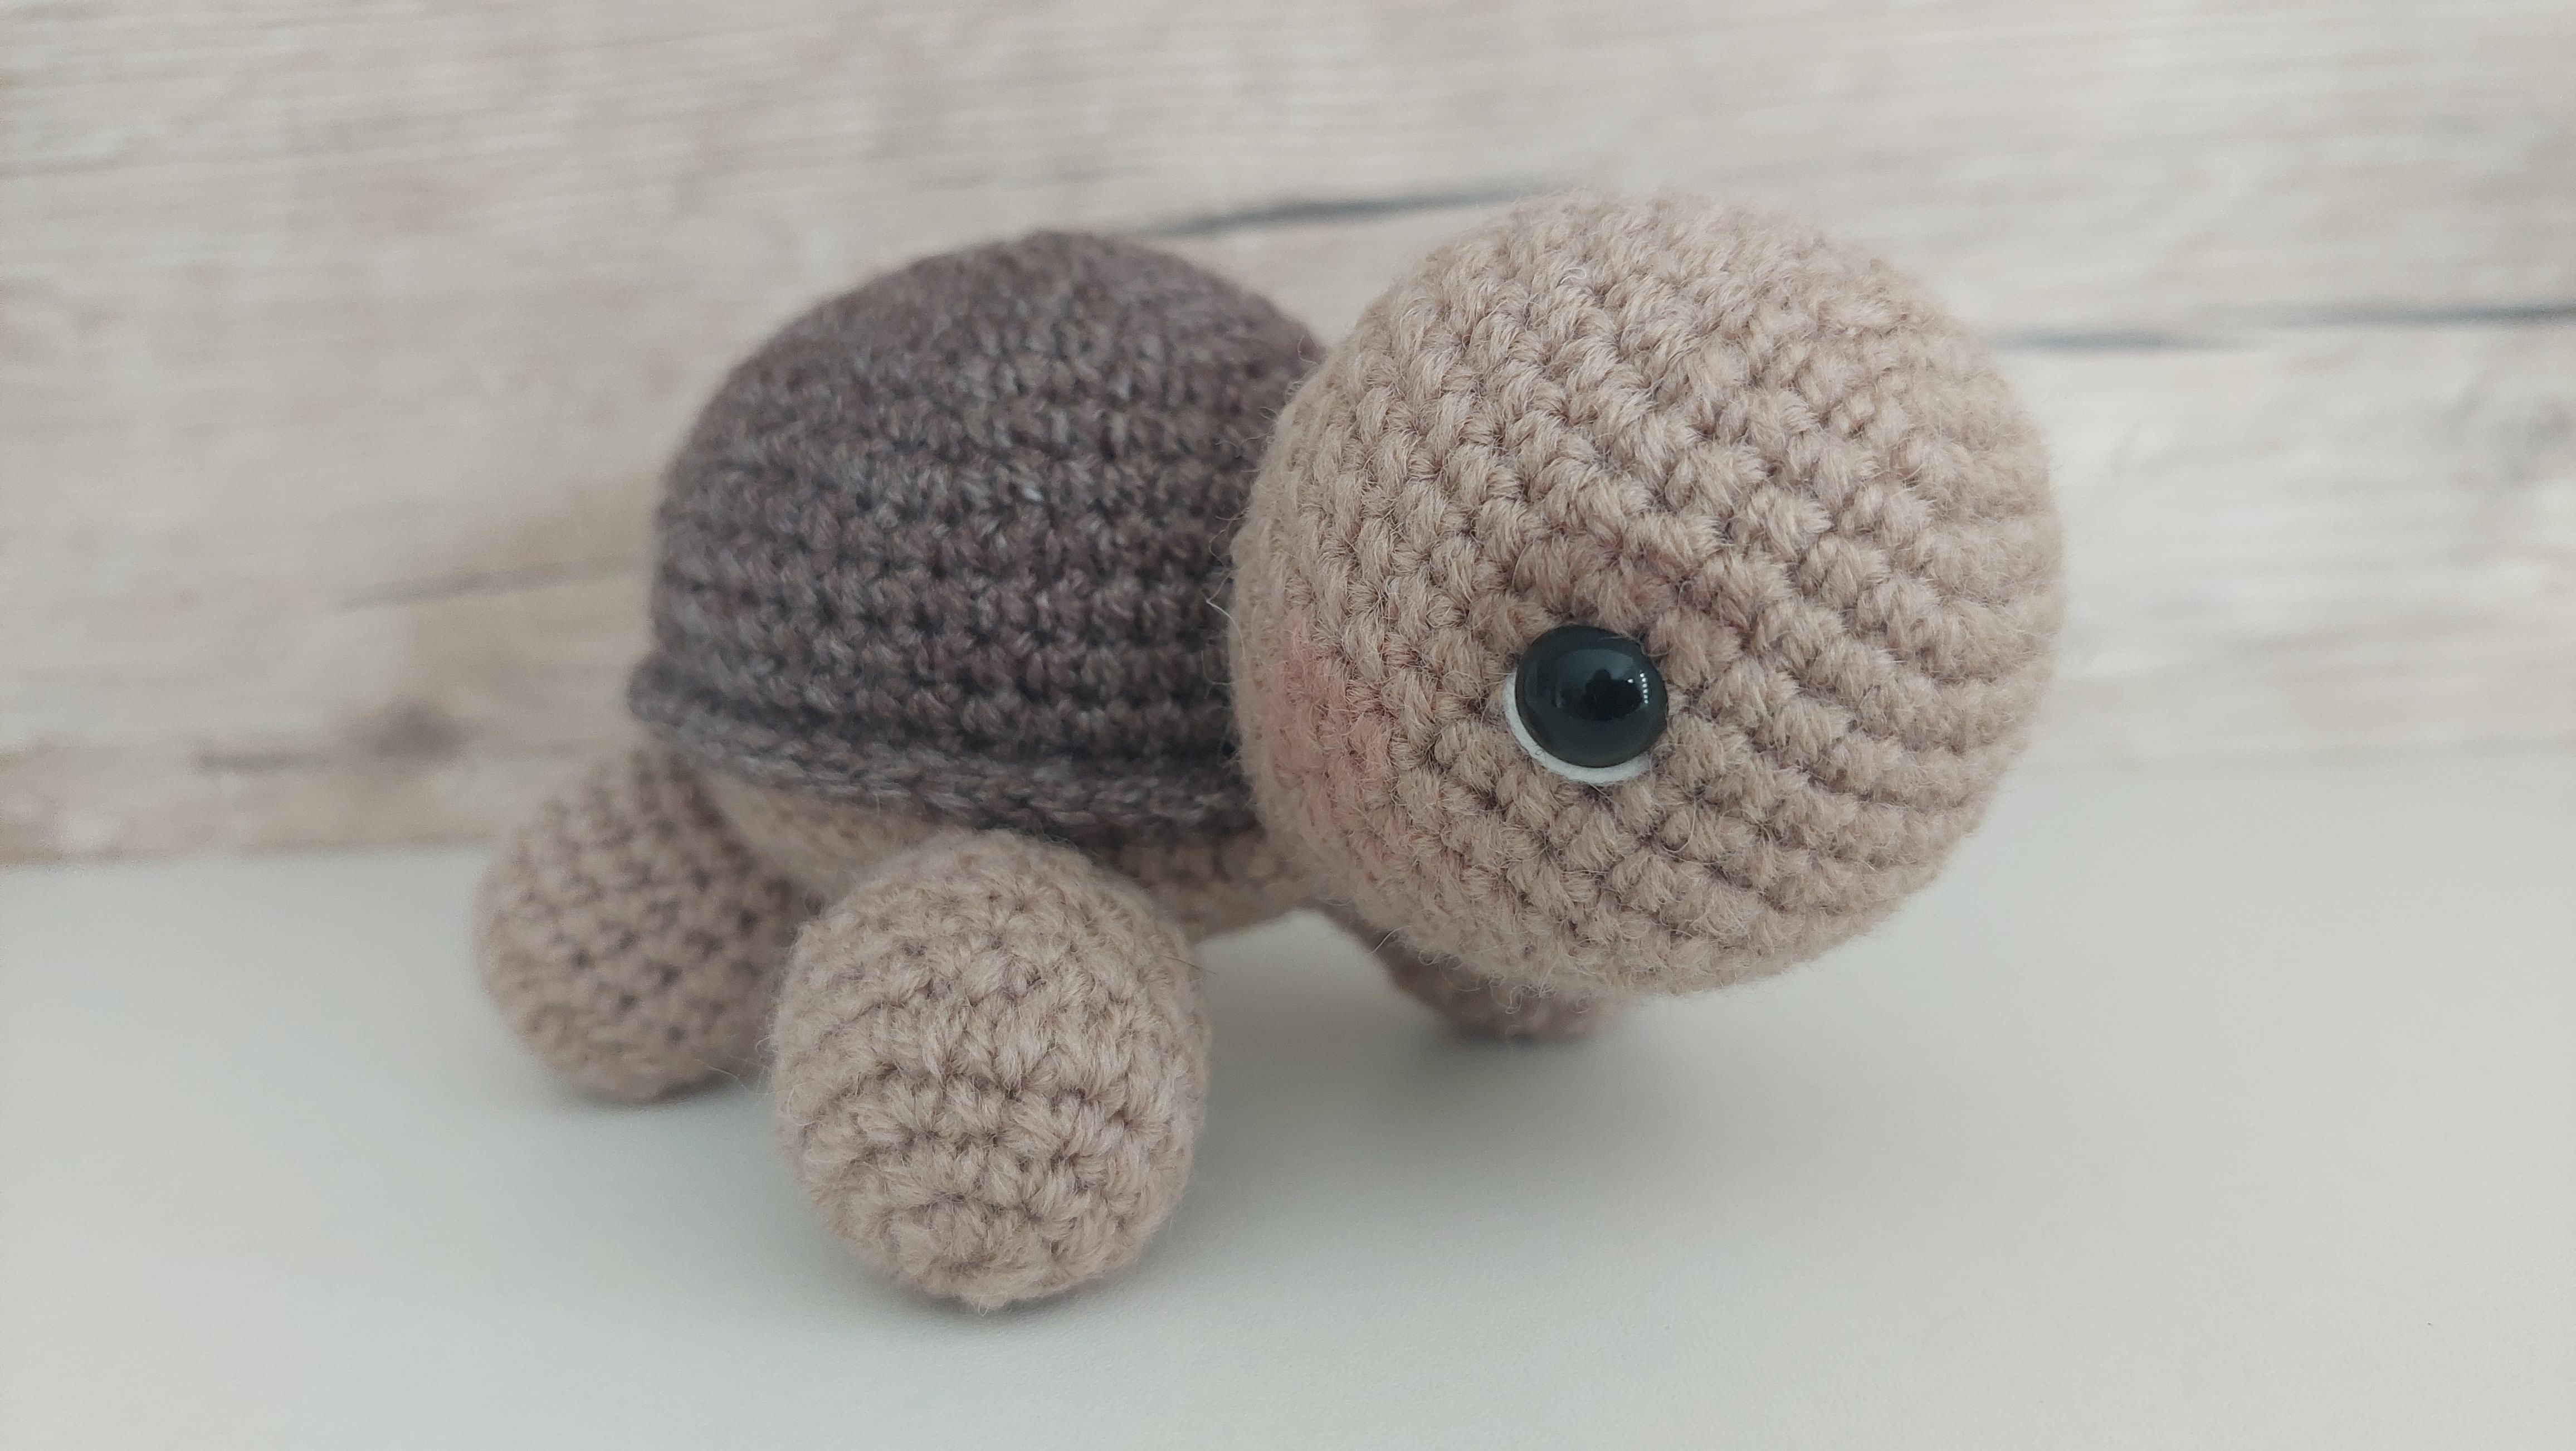 PATTERN ONLY: Crochet Mini Turtle Bag / Small Pouch / Bag 